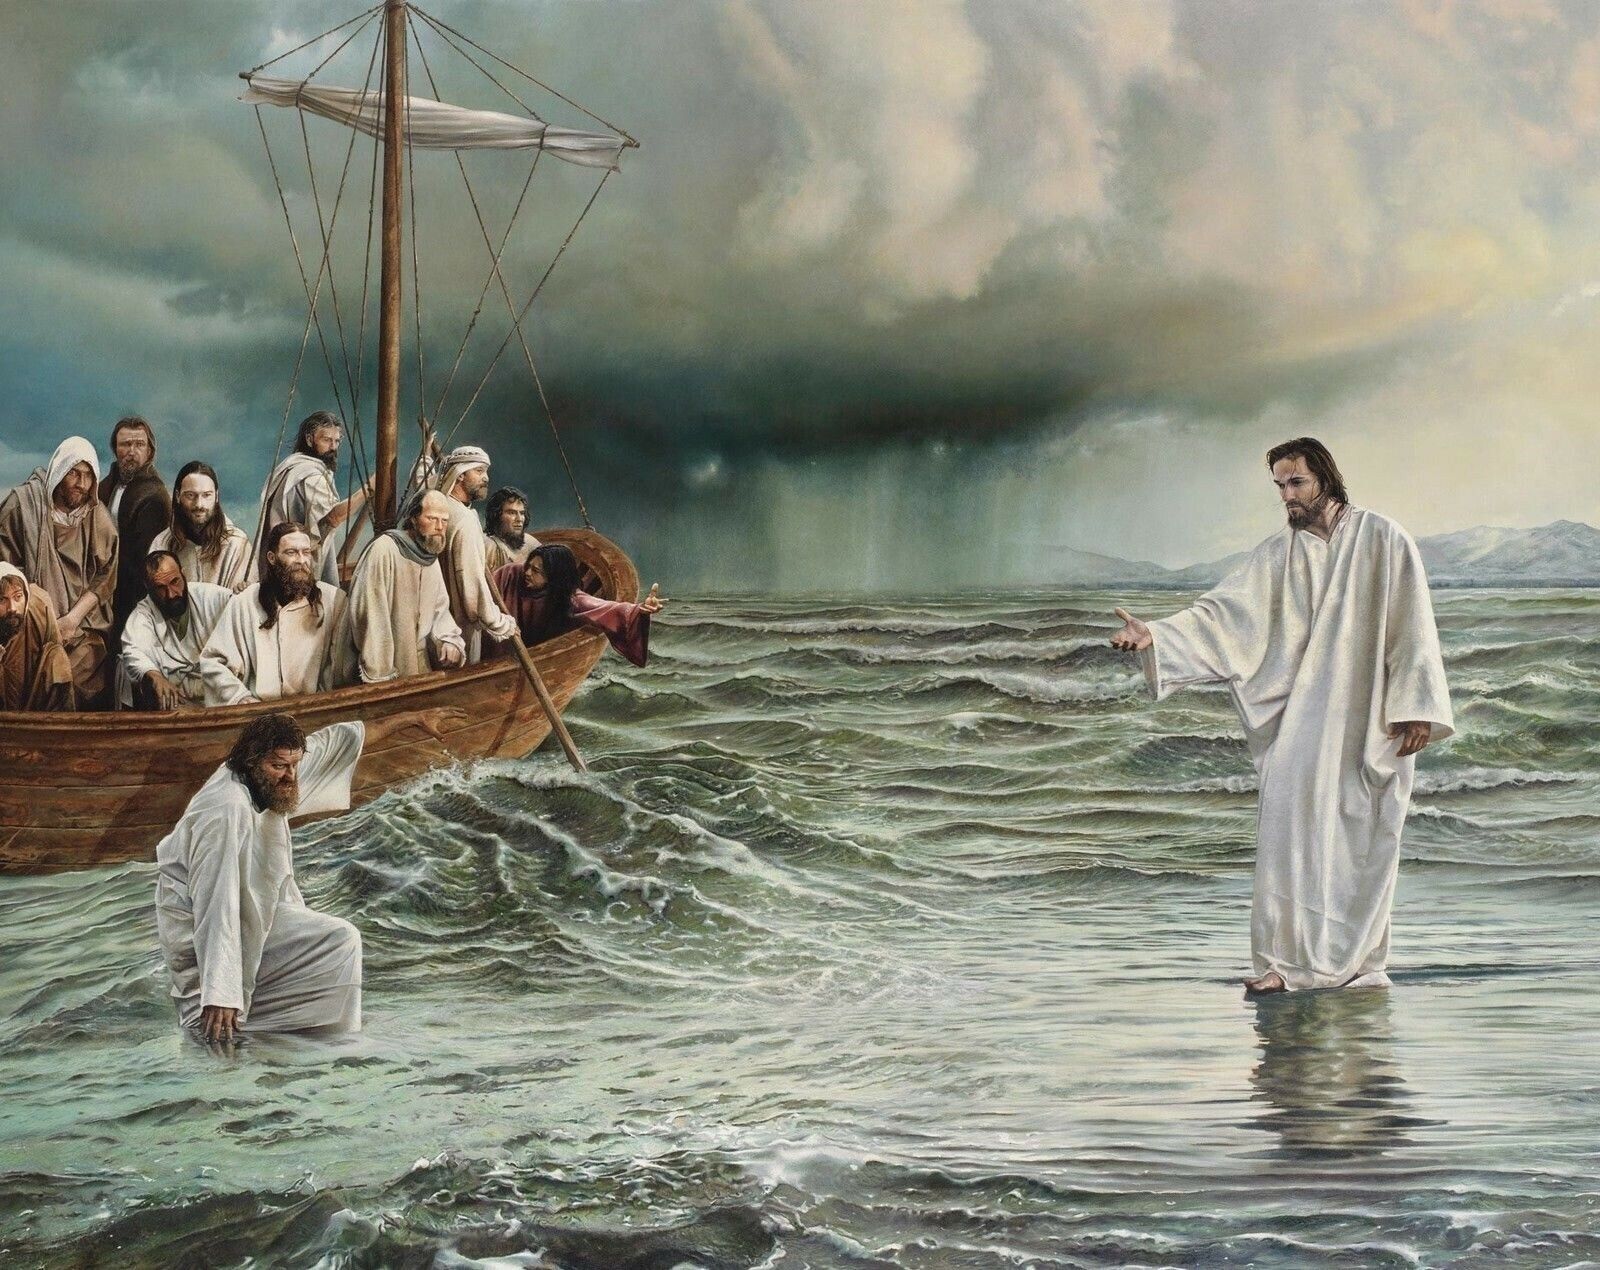 JESUS WALKING ON WATER 8X10 GLOSSY PHOTO PICTURE